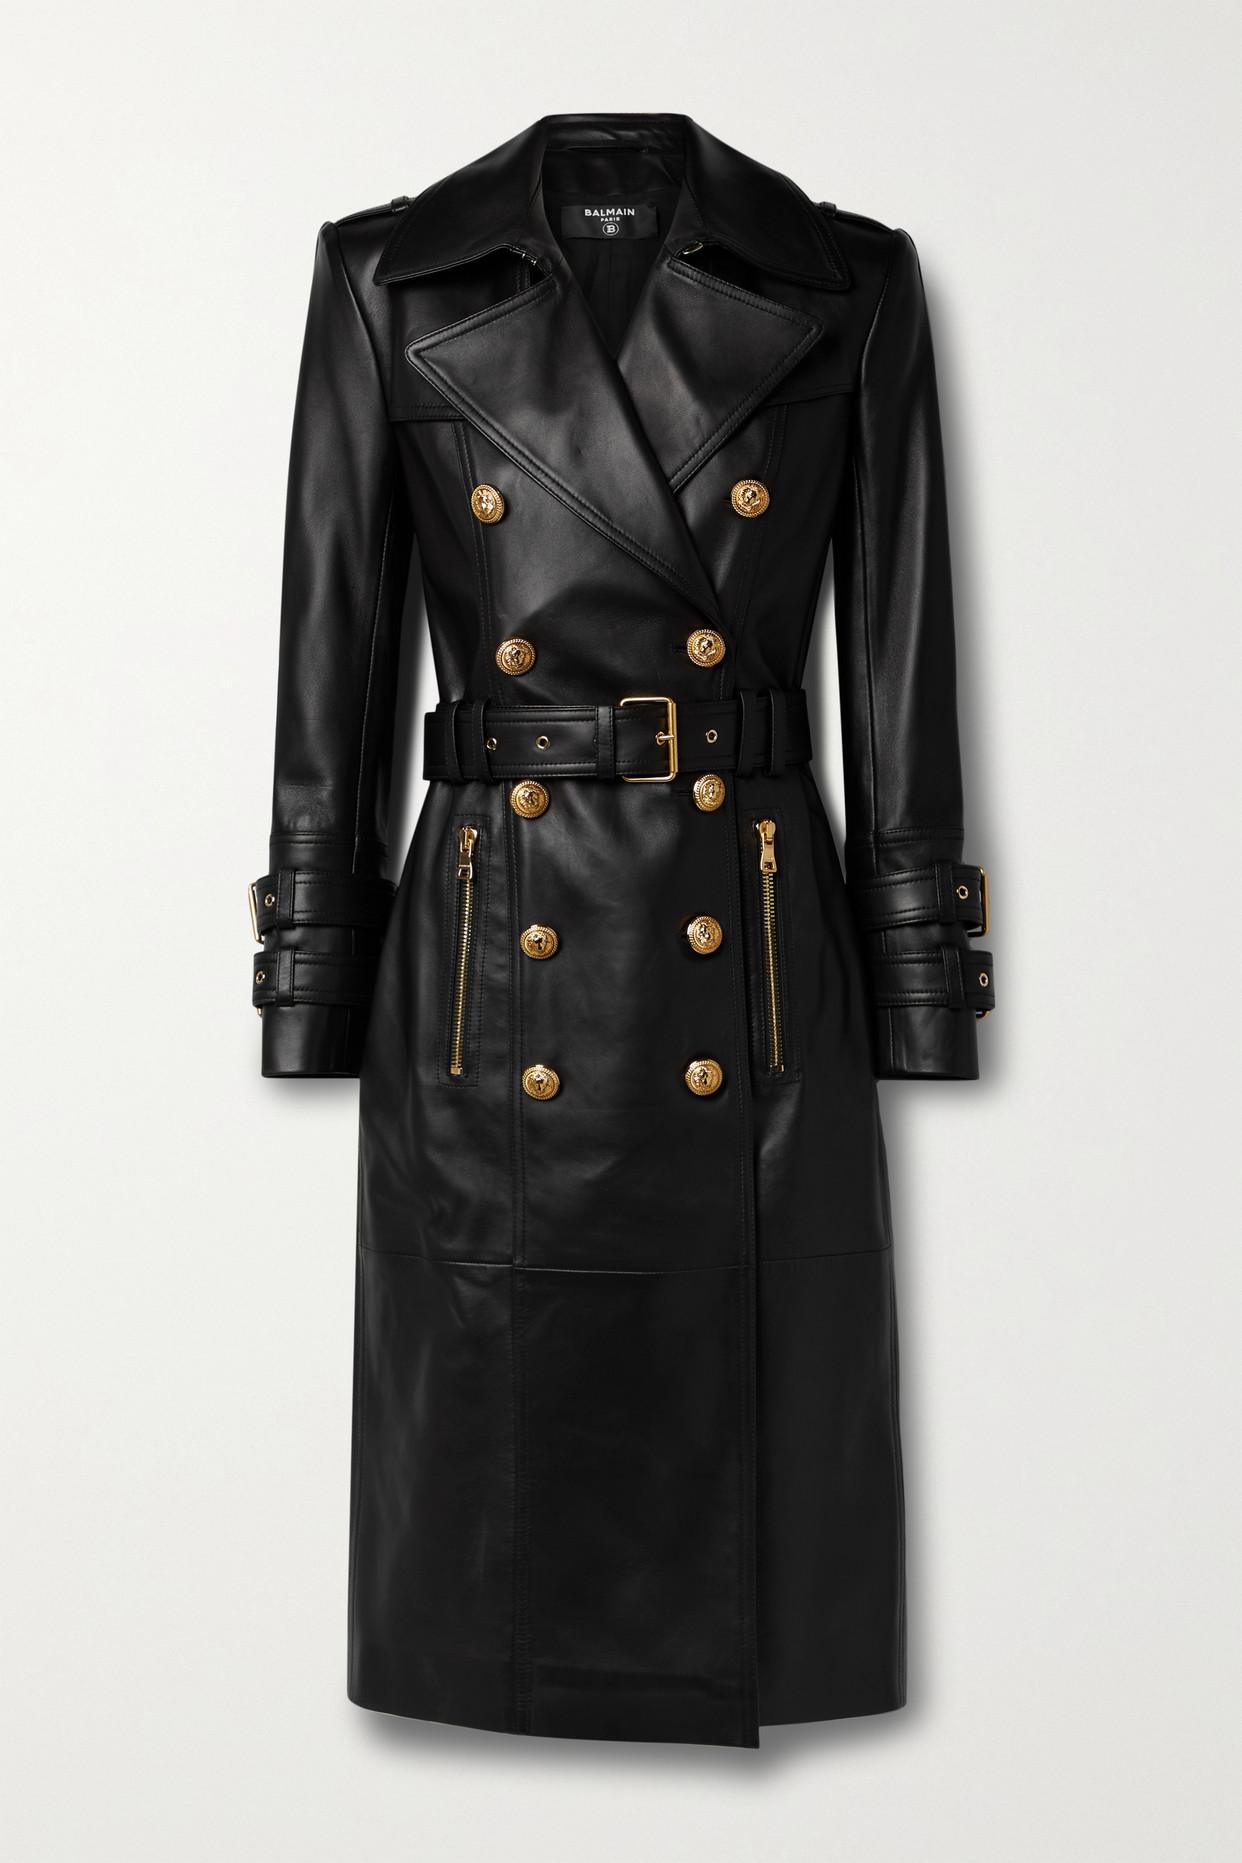 Balmain Belted Double-breasted Leather Trench Coat in Black | Lyst